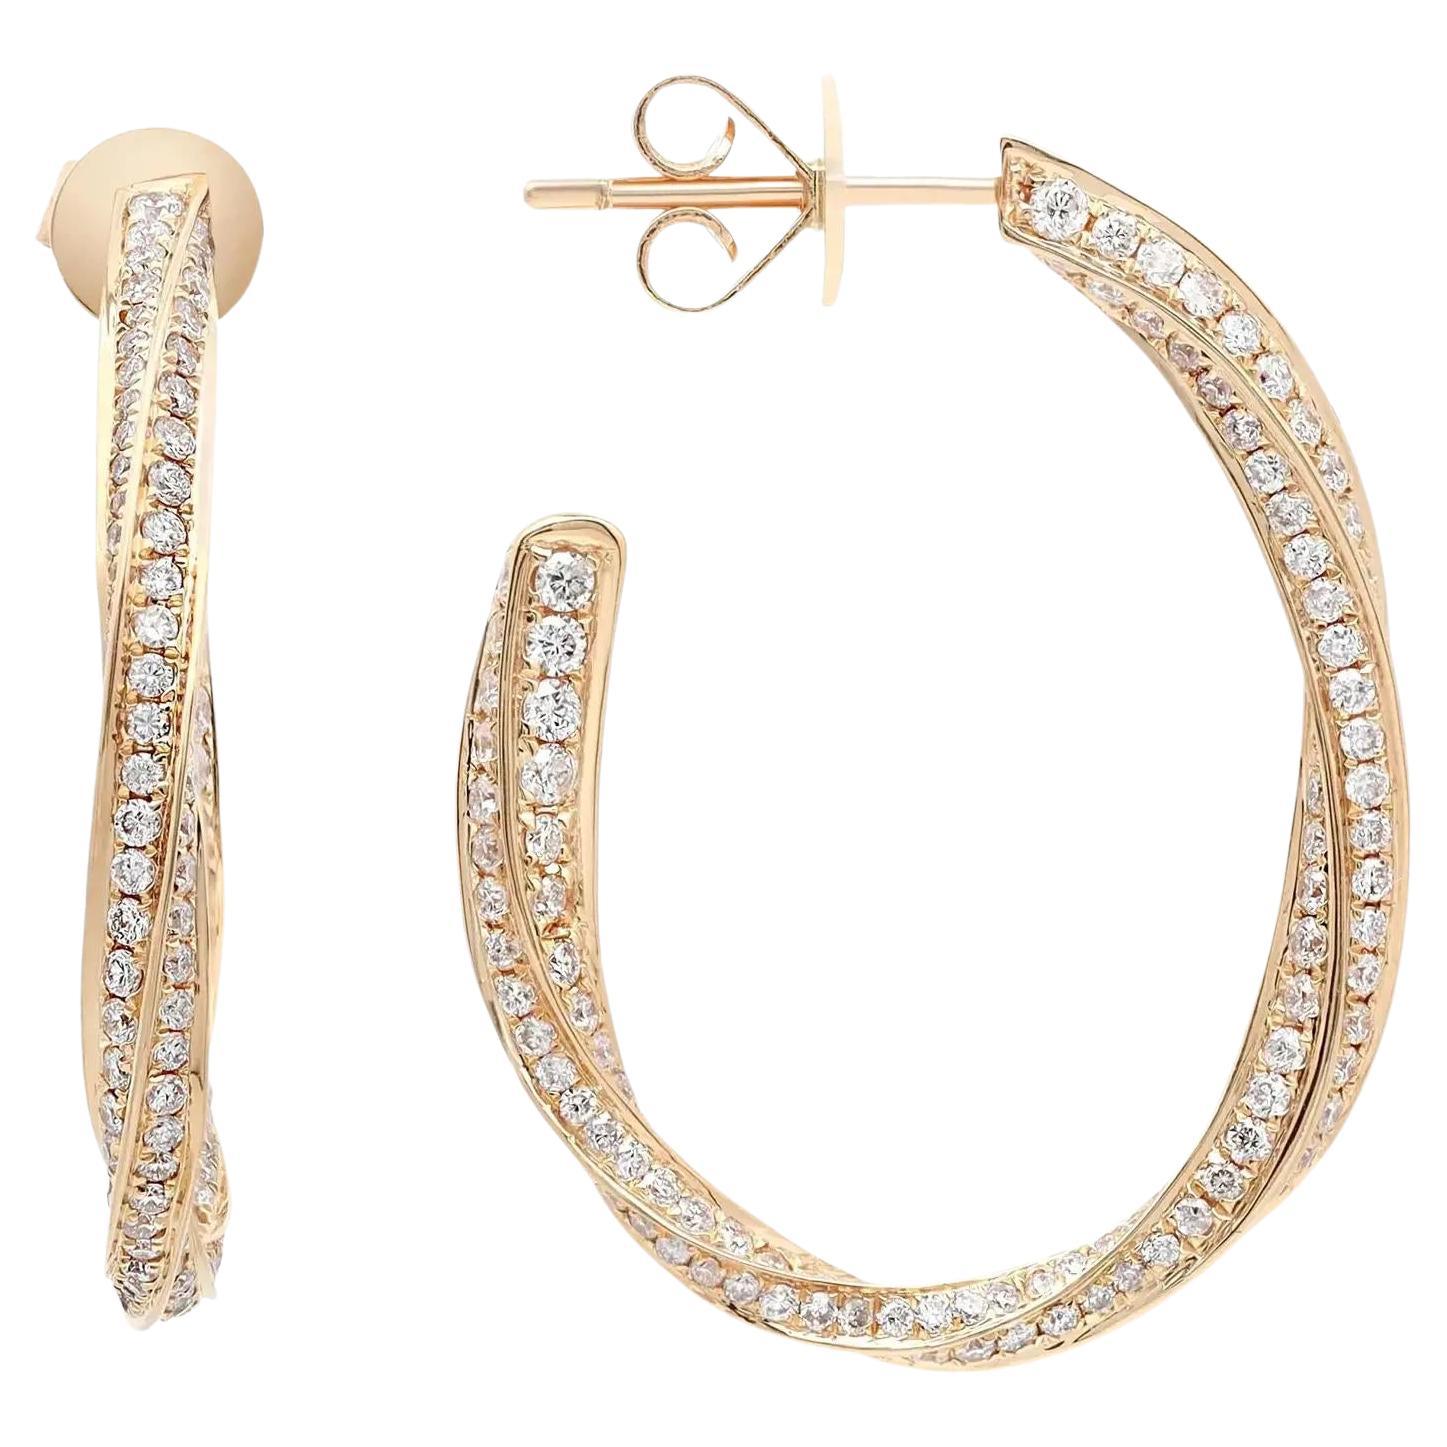 2.04Cttw Pave Set Round Cut Diamond Hoop Earrings 18K Yellow Gold For Sale